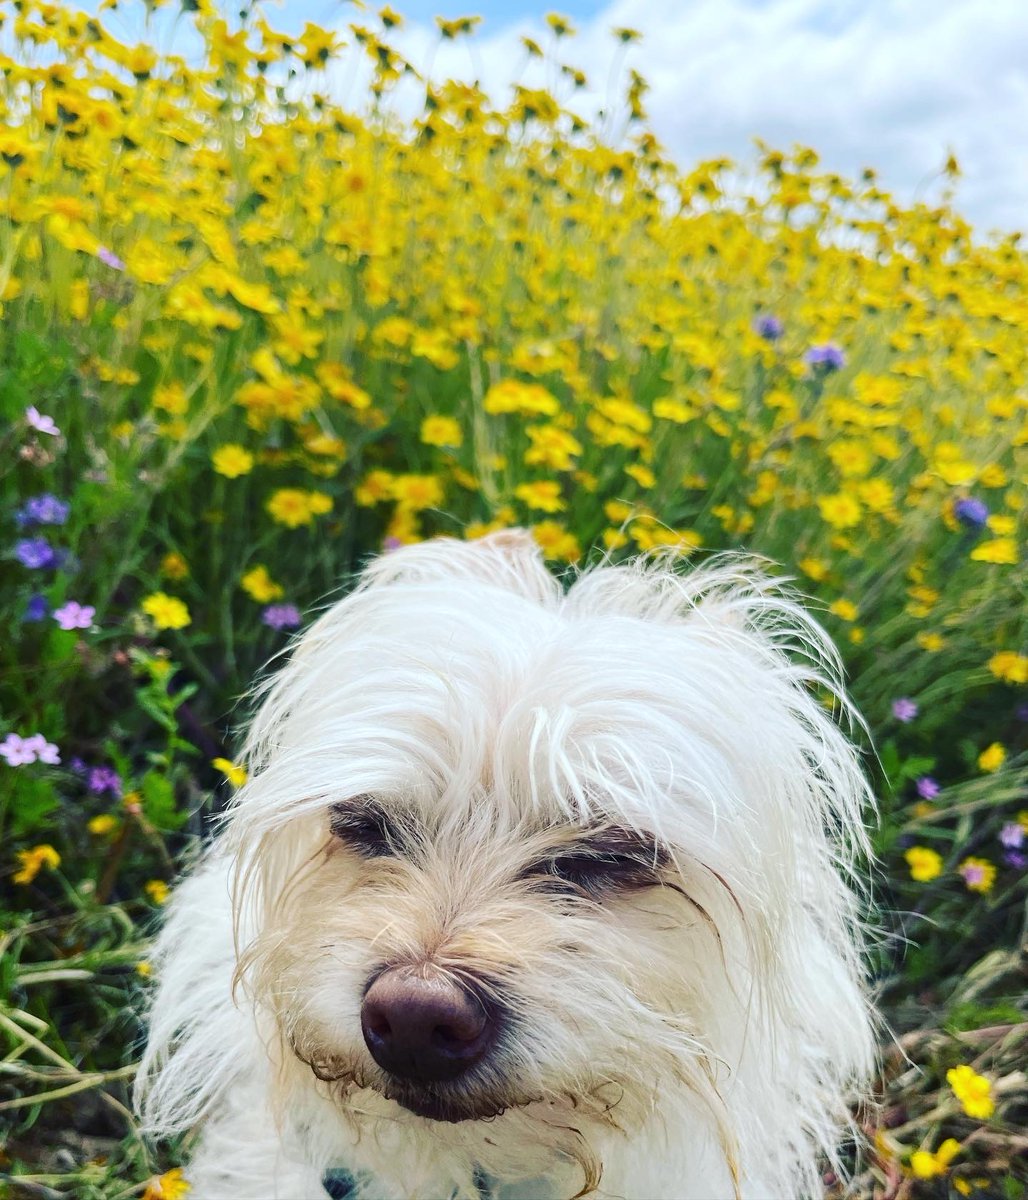 California blooming 🌼 (Wall-E 🐾 found it entirely overwhelming 🙀) #californiablooms #californiapoppy #travelingdog #CarrizoPlainNationalMonument